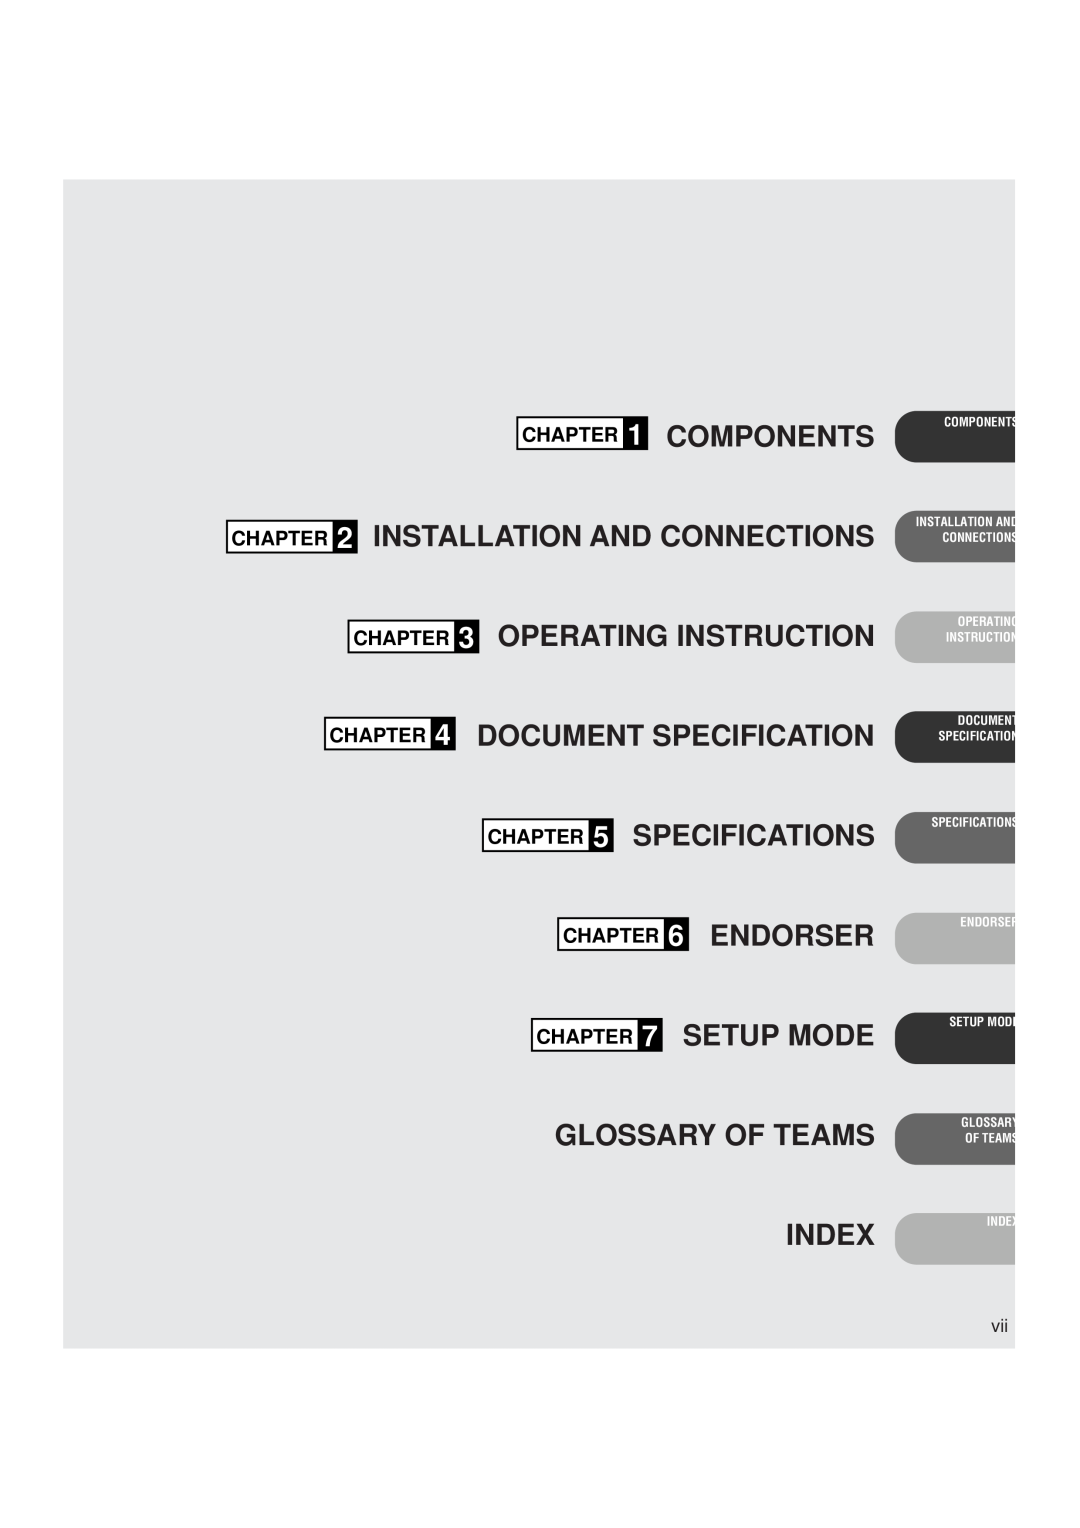 Fujitsu M3099GX Components Installation And Connections, Operating Instruction Document Specification, Specifications 